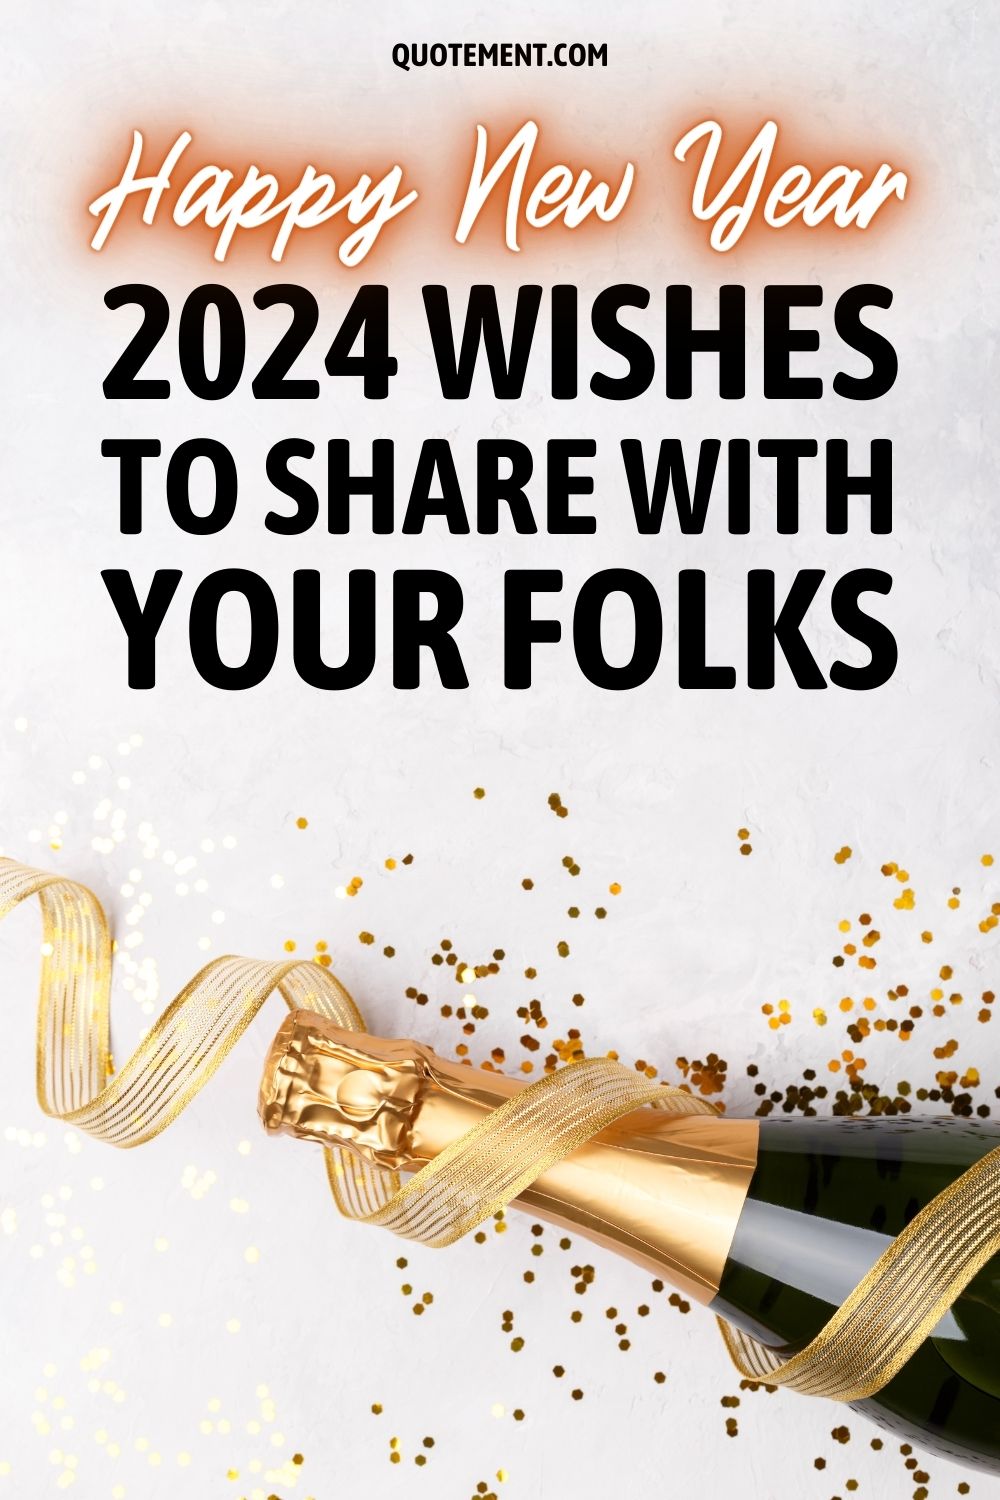 90 Happy New Year's Quotes & Wishes To Ring In An Amazing 2024